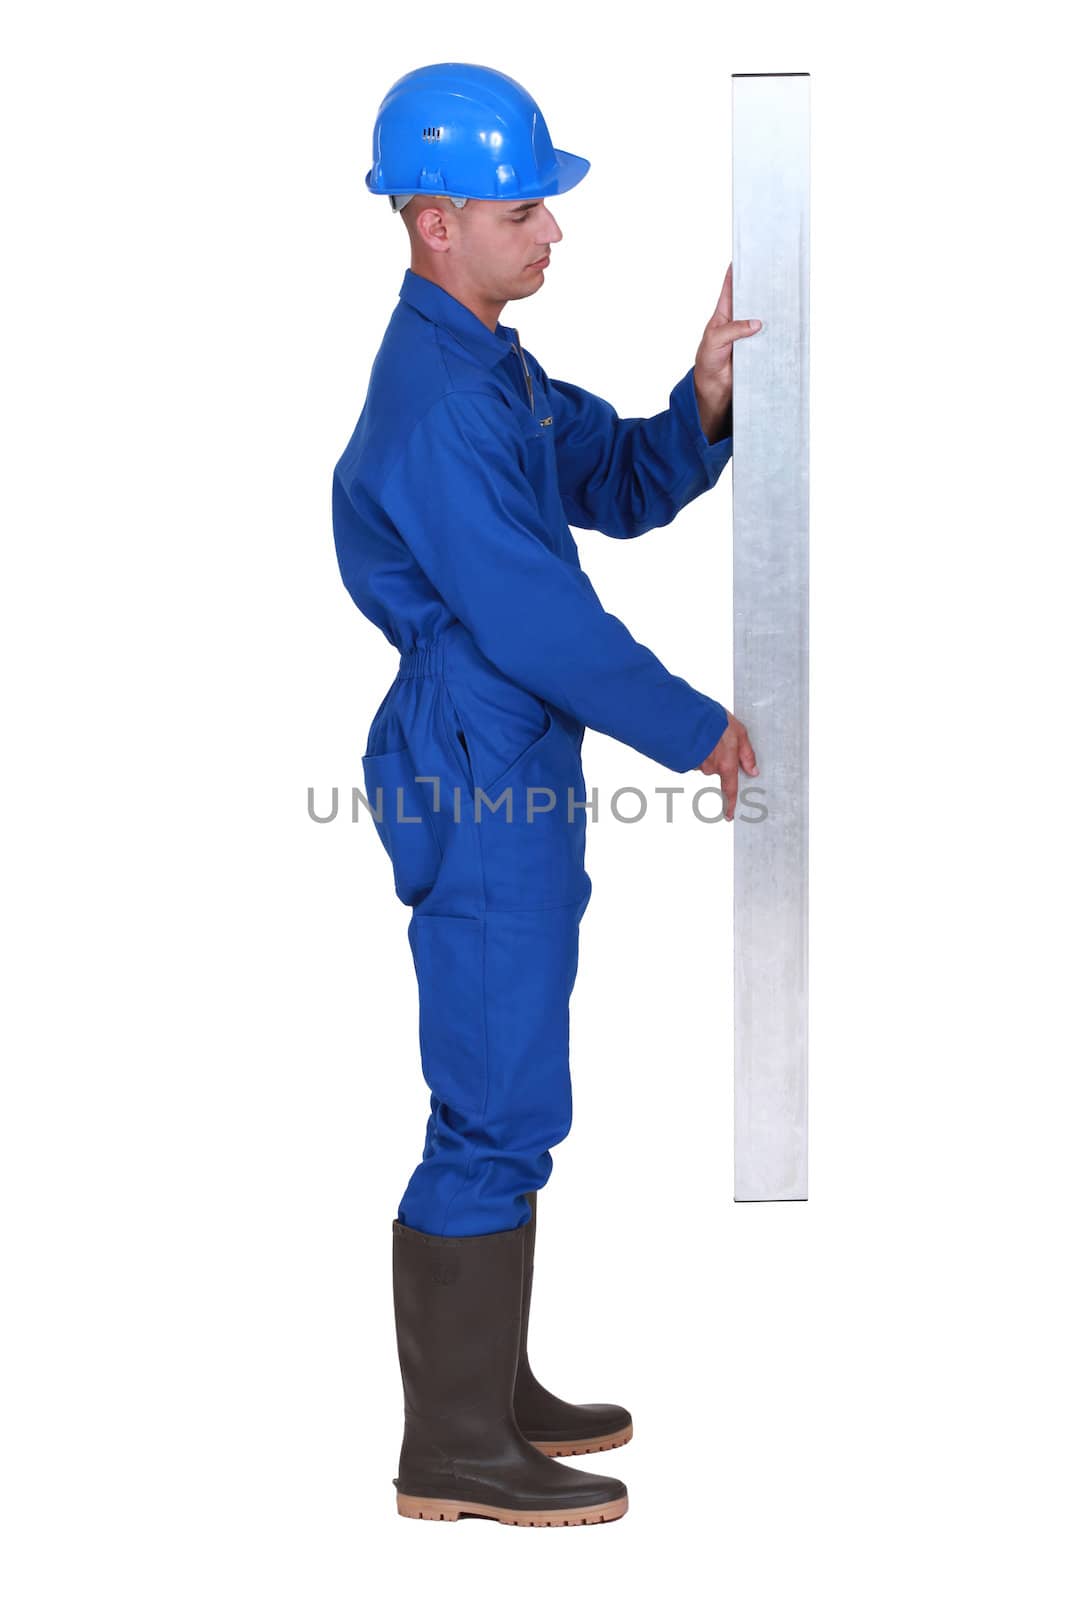 craftsman holding a metal board by phovoir